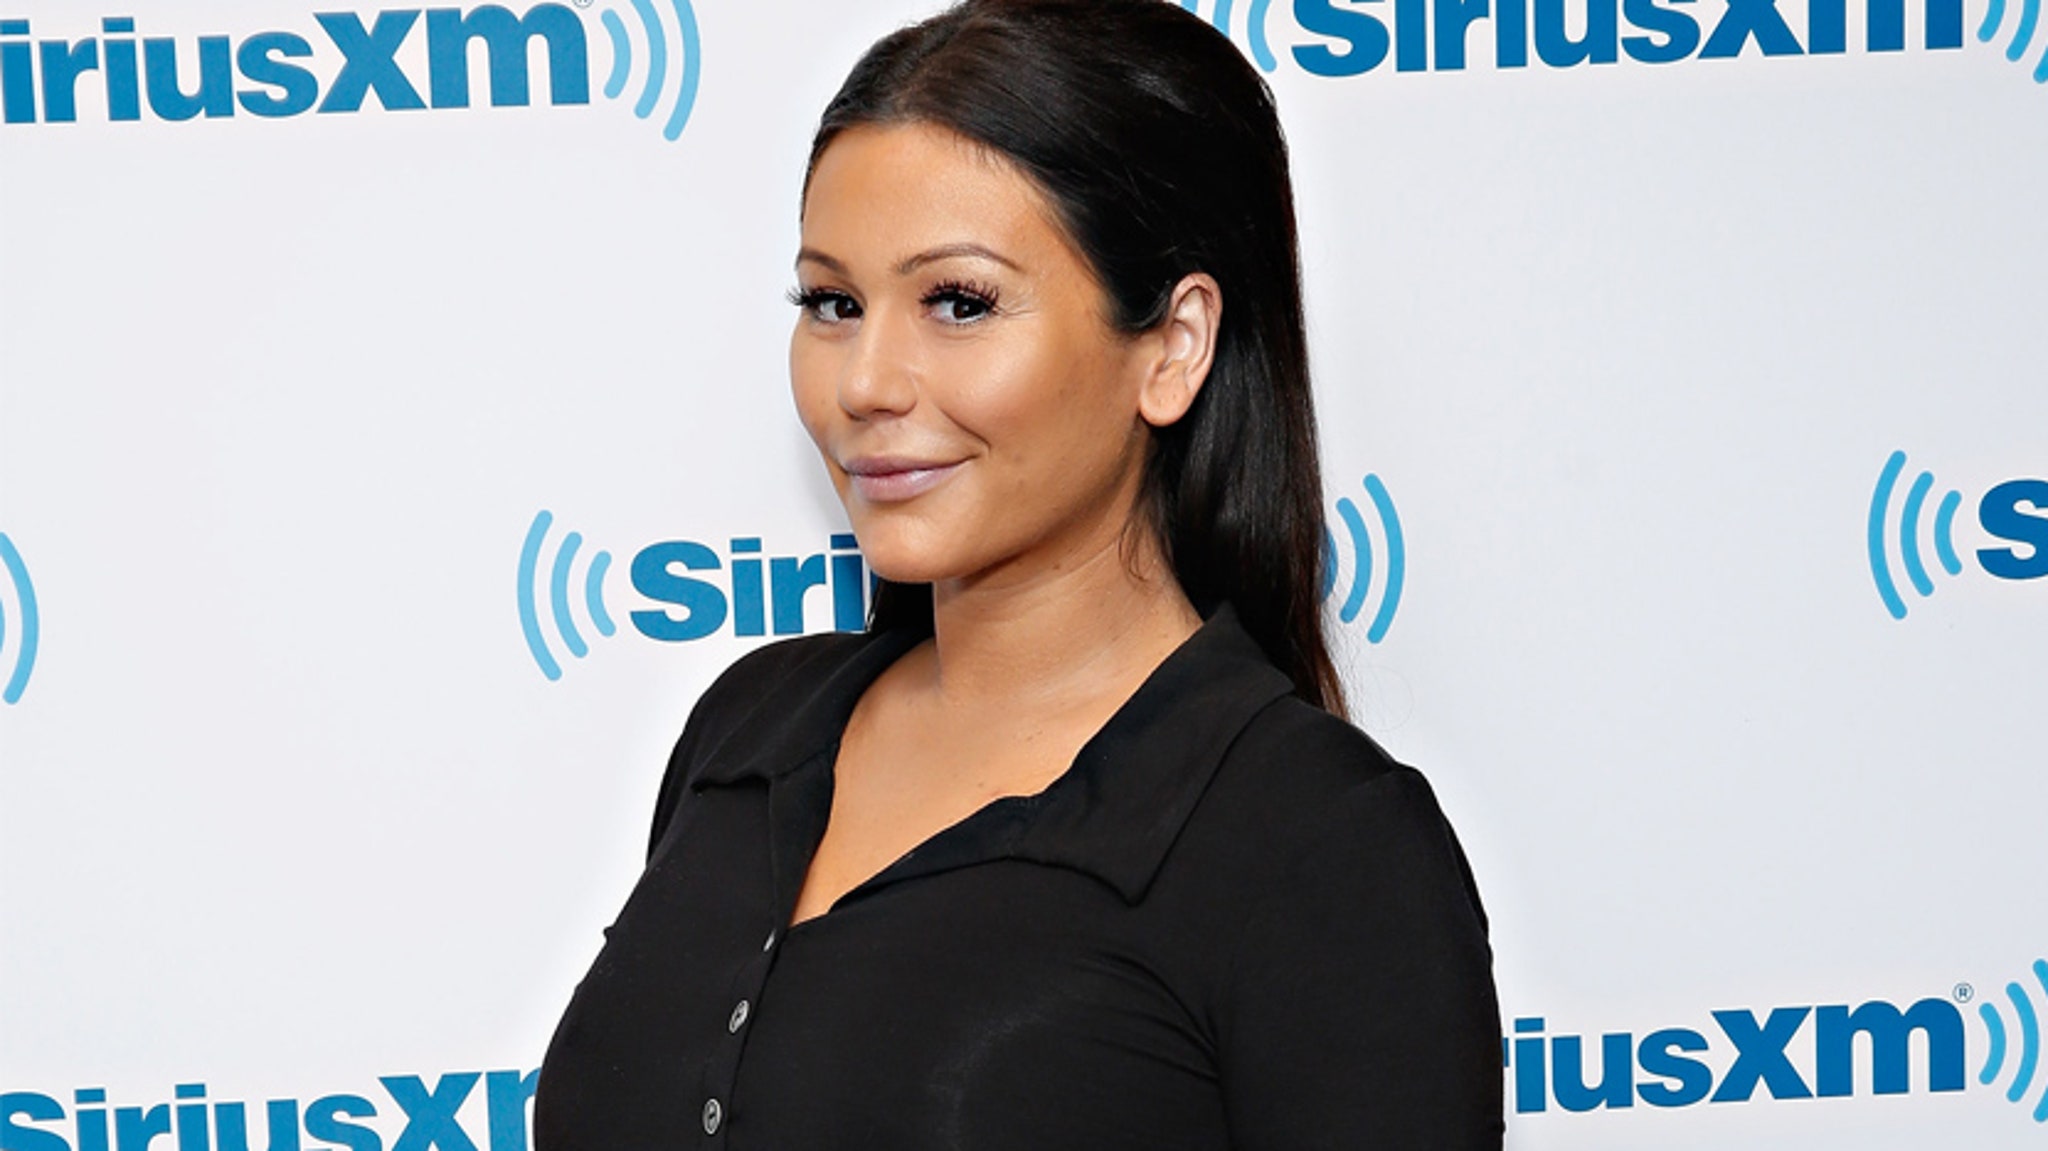 JWoww Flaunts Bare Baby Bump During "Last Week" of Pregnancy